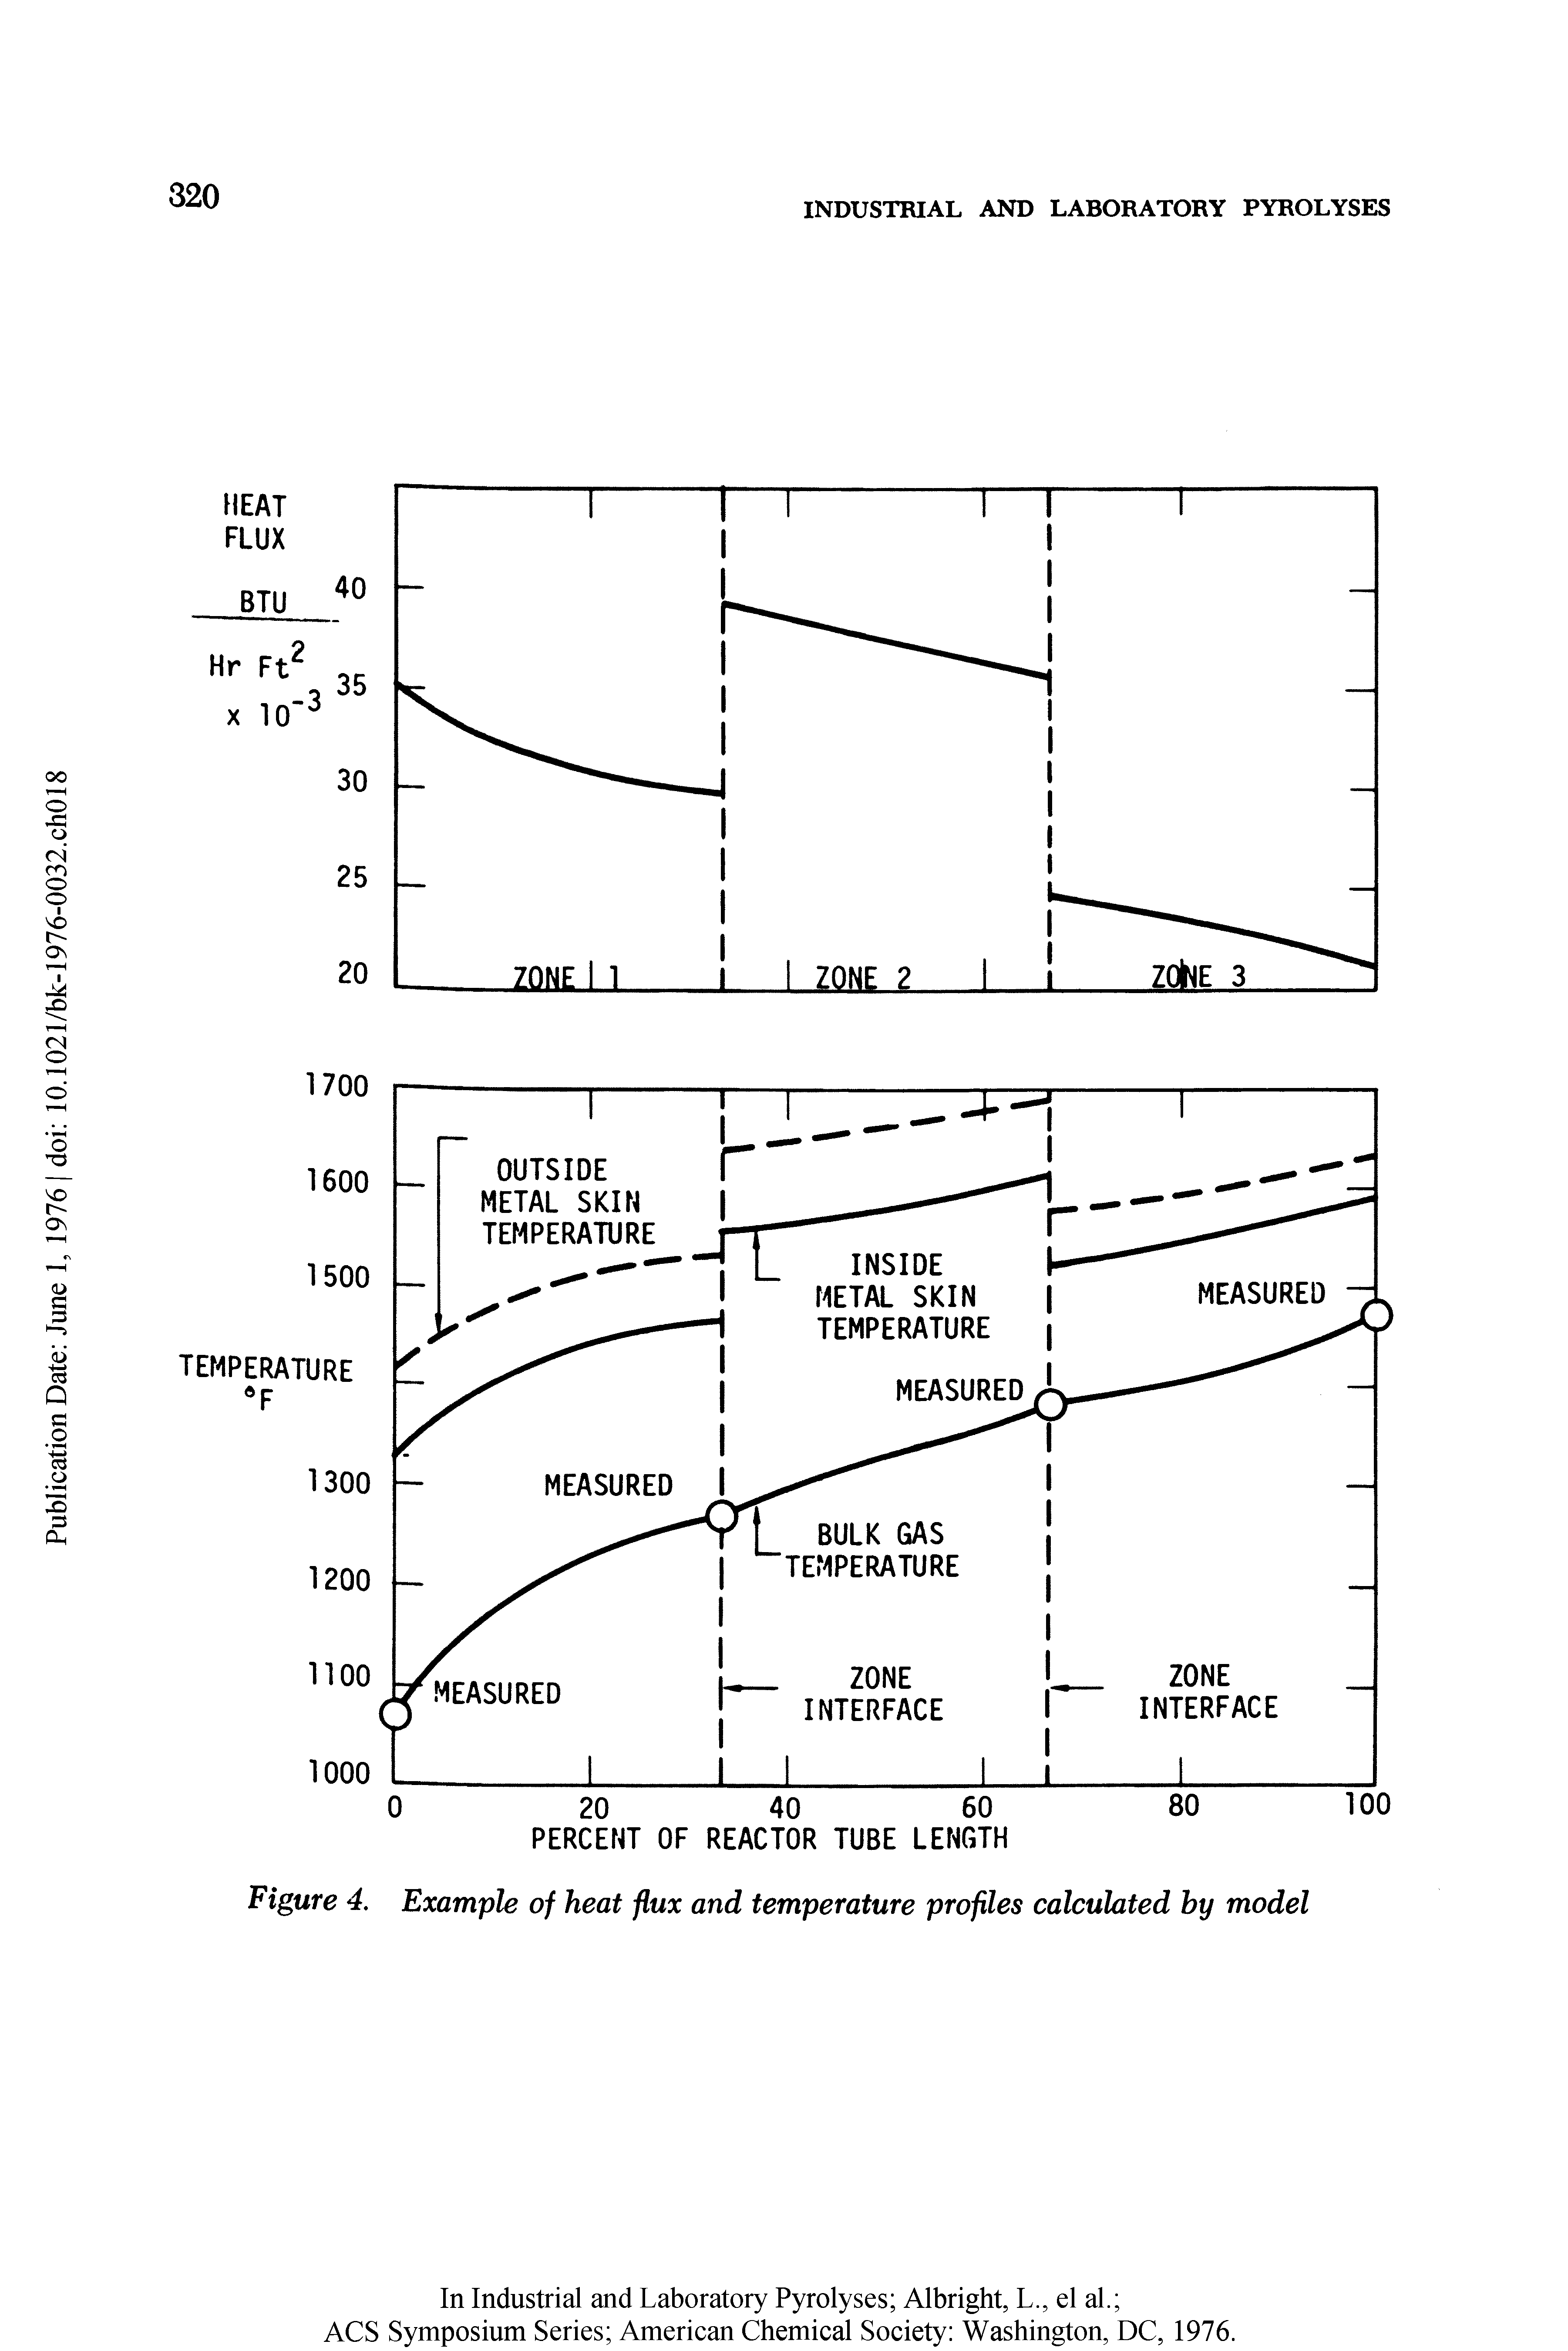 Figure 4. Example of heat flux and temperature profiles calculated by model...